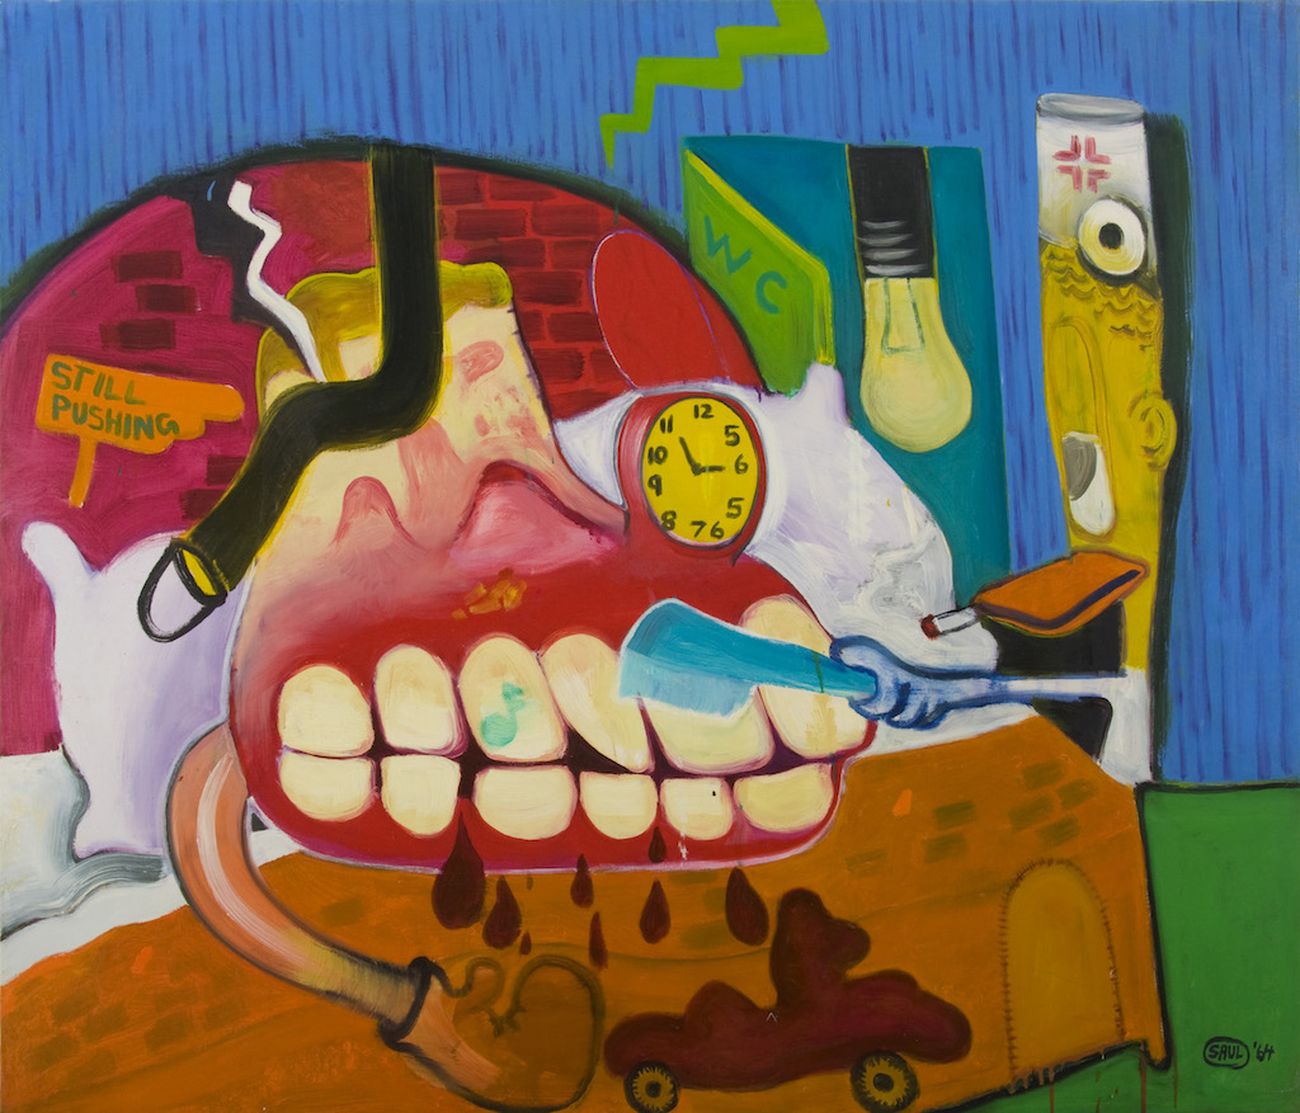 Peter Saul, Sickroom, 1964. Courtesy Mary Boone Gallery, New York